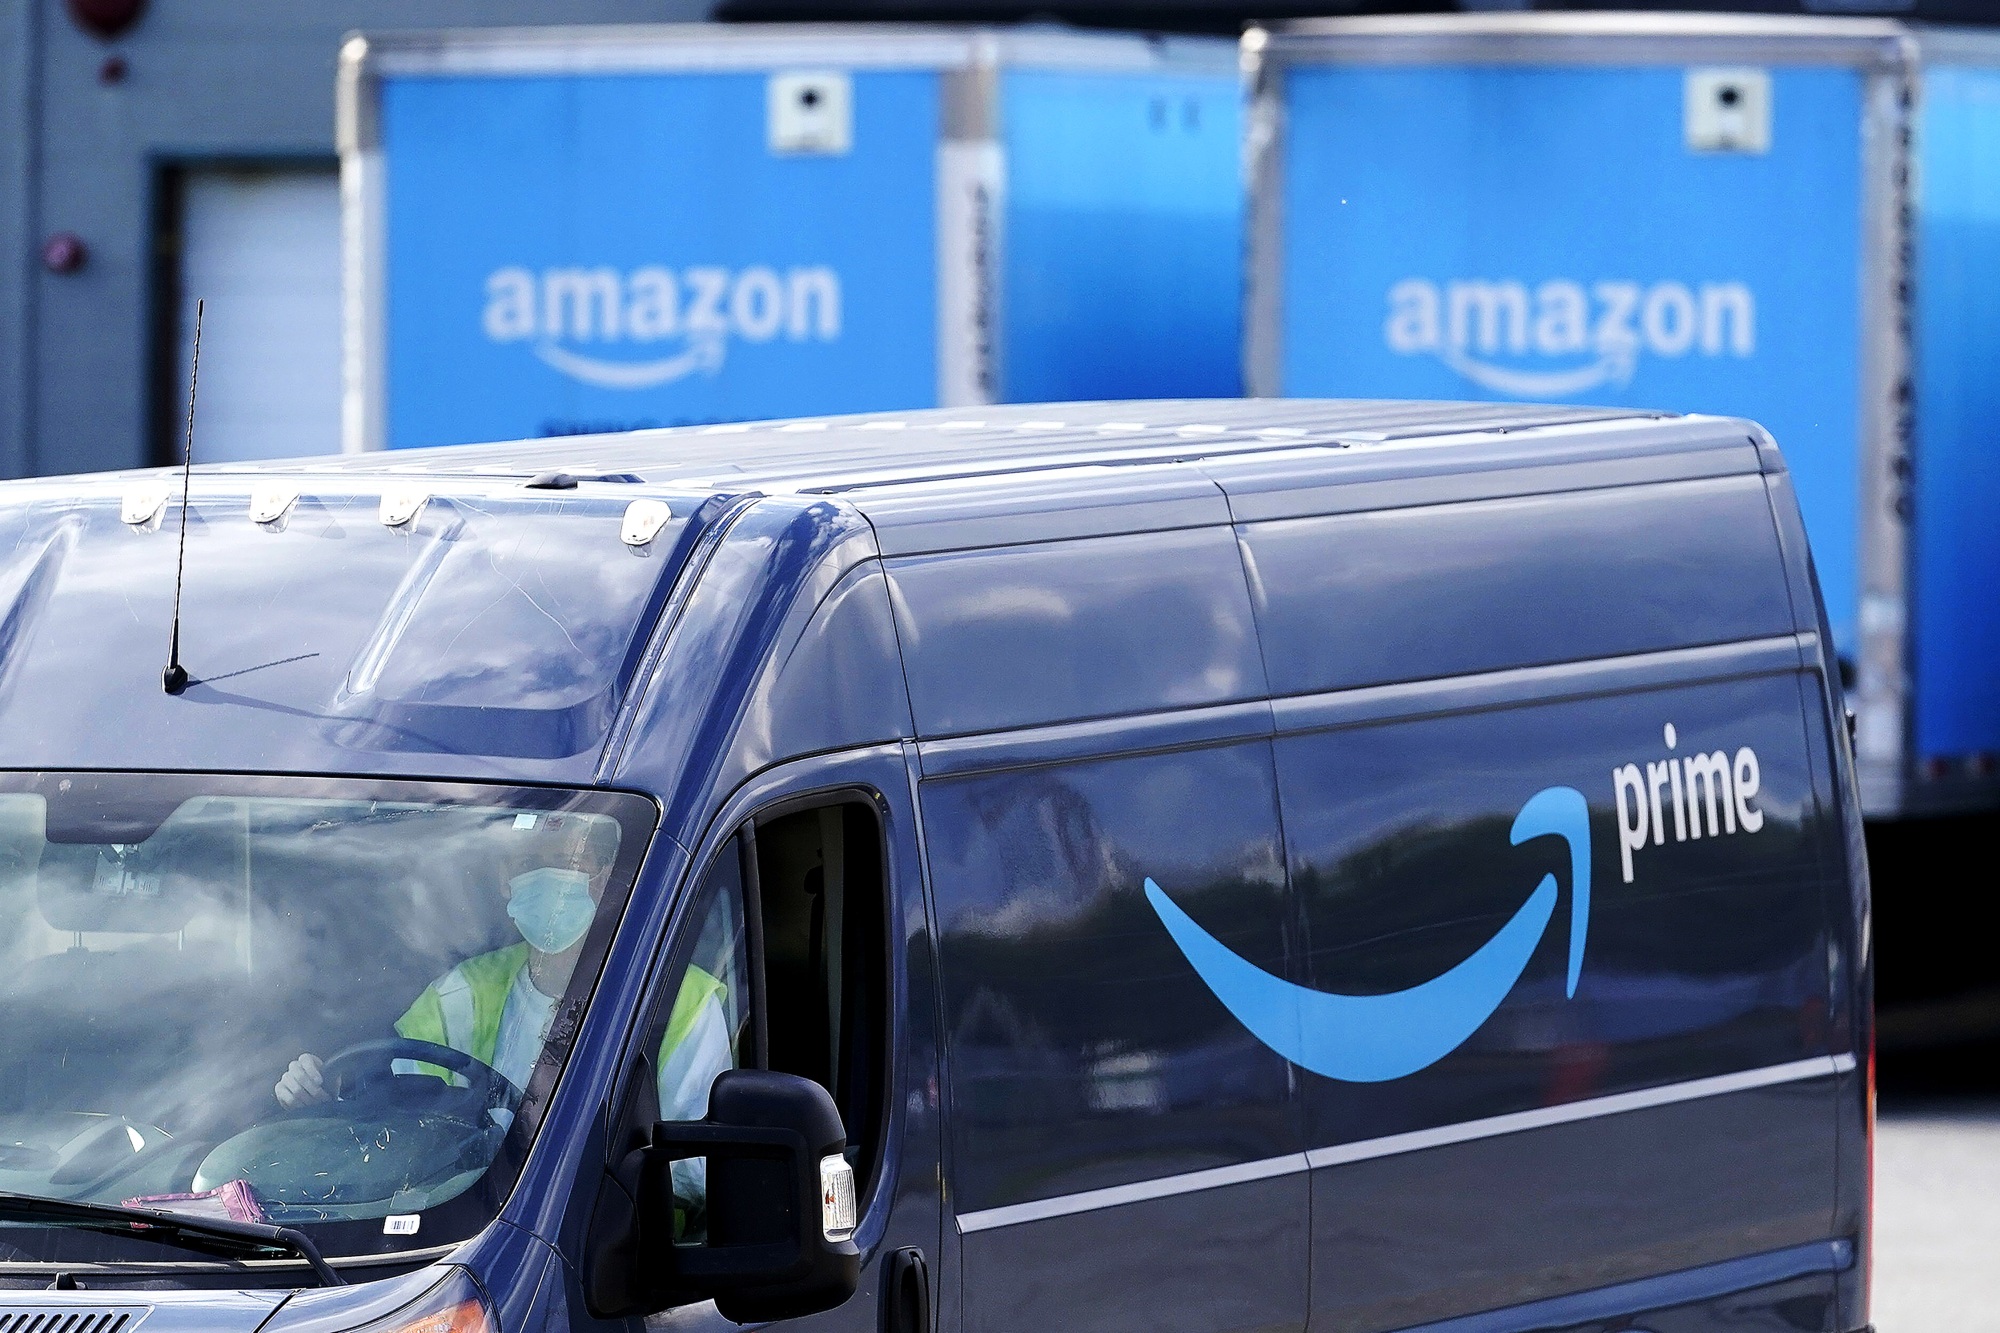 Amazon Acknowledges Issue of Drivers Urinating in Bottles During Delivery Rounds in Apology to Congressman Mark Pocan